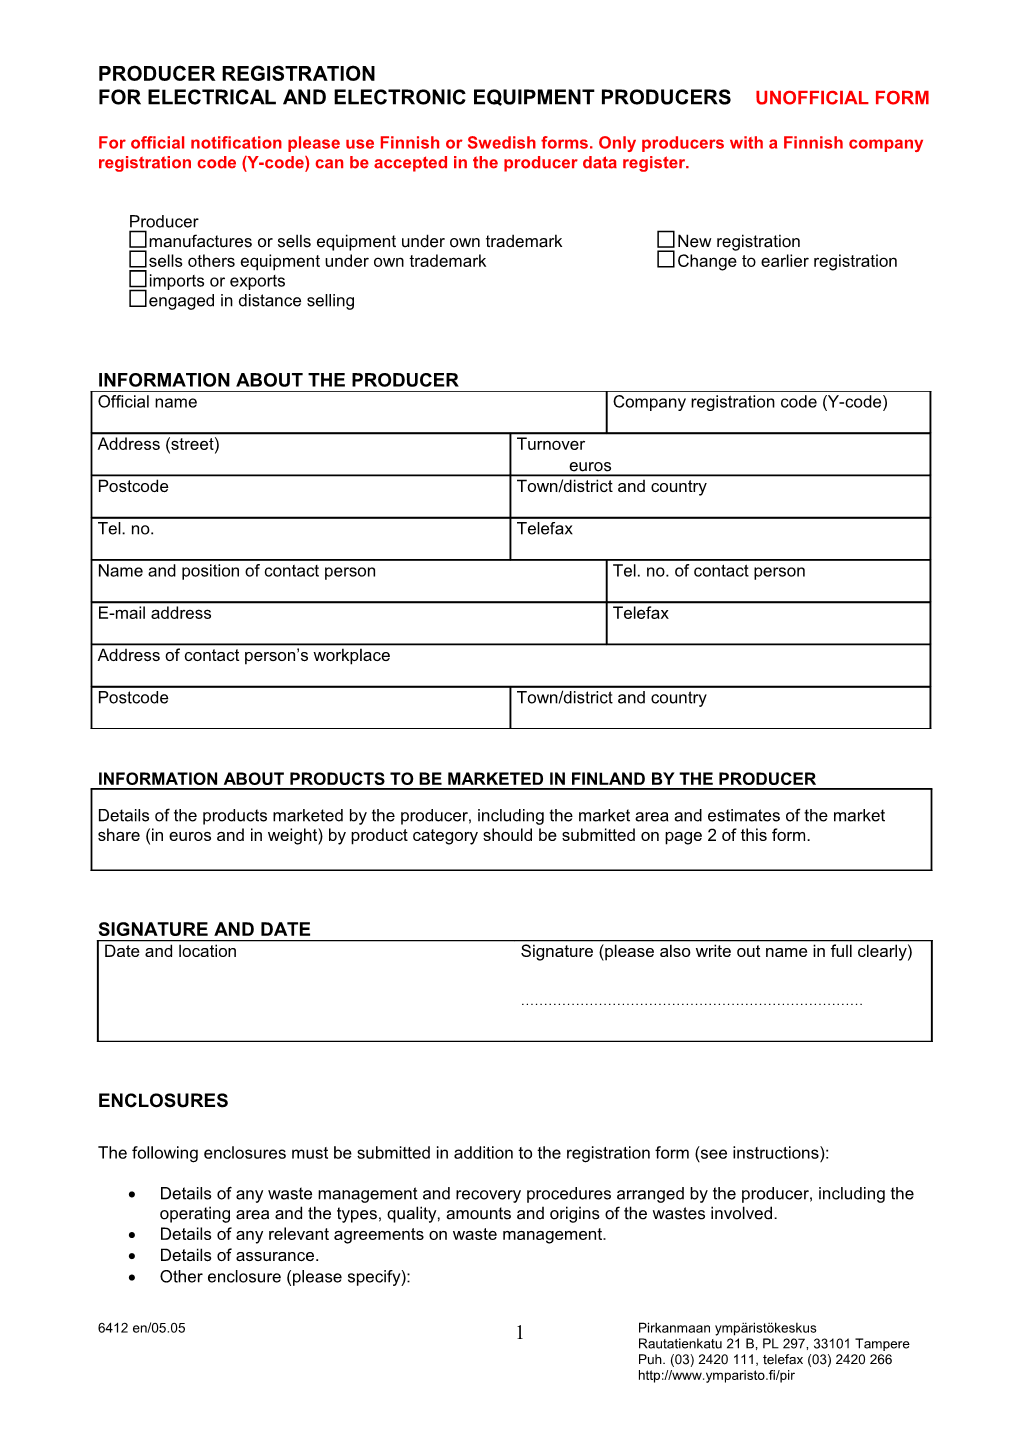 For Electrical and Electronic Equipment Producers Unofficial Form